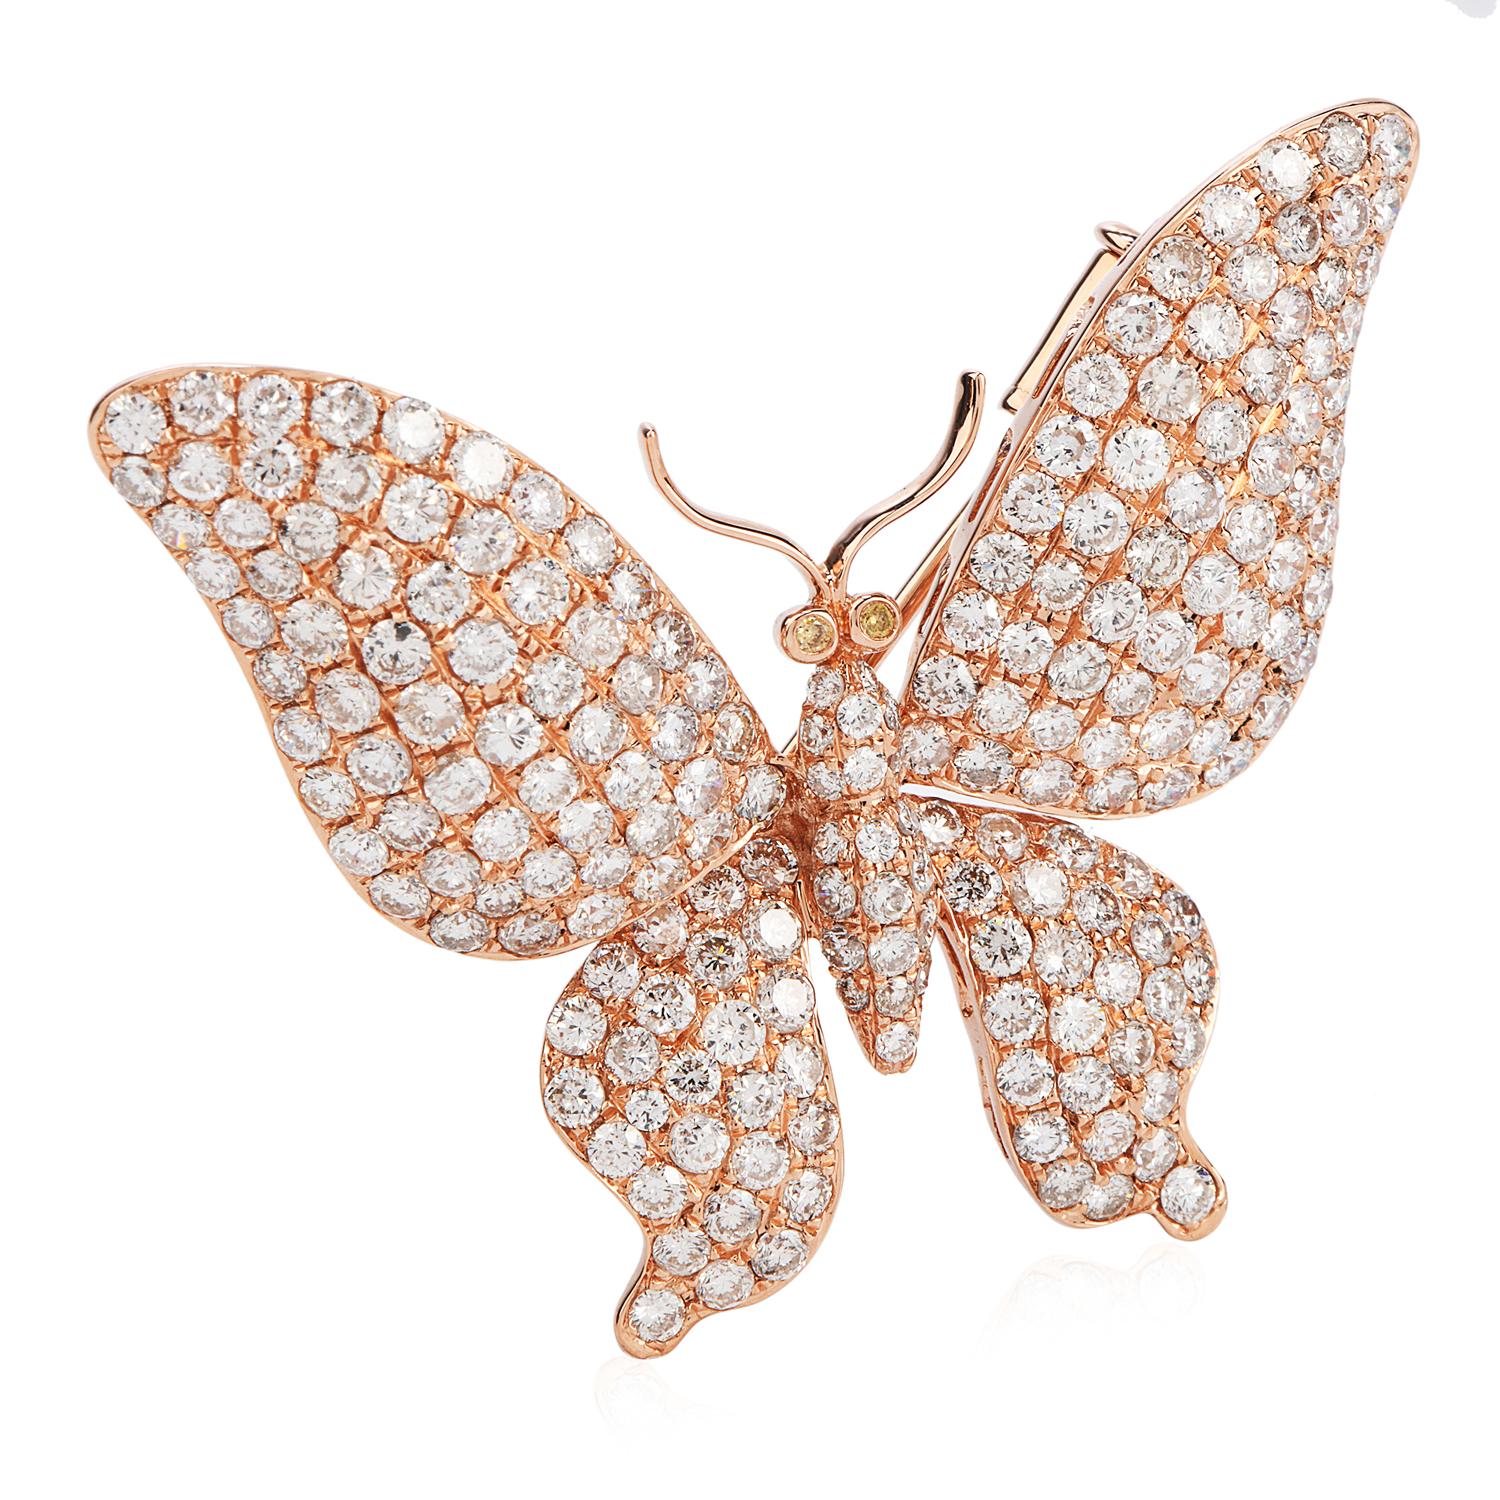 This exquisite Estate Diamond butterfly pin crafted in solid 18K pink gold. Its body is covered with Round-cut natural diamond approx. 4.58  carats t, G-H color, VS clarity with few Si's. This sweet brooch pin will be a joy to own, and remains in